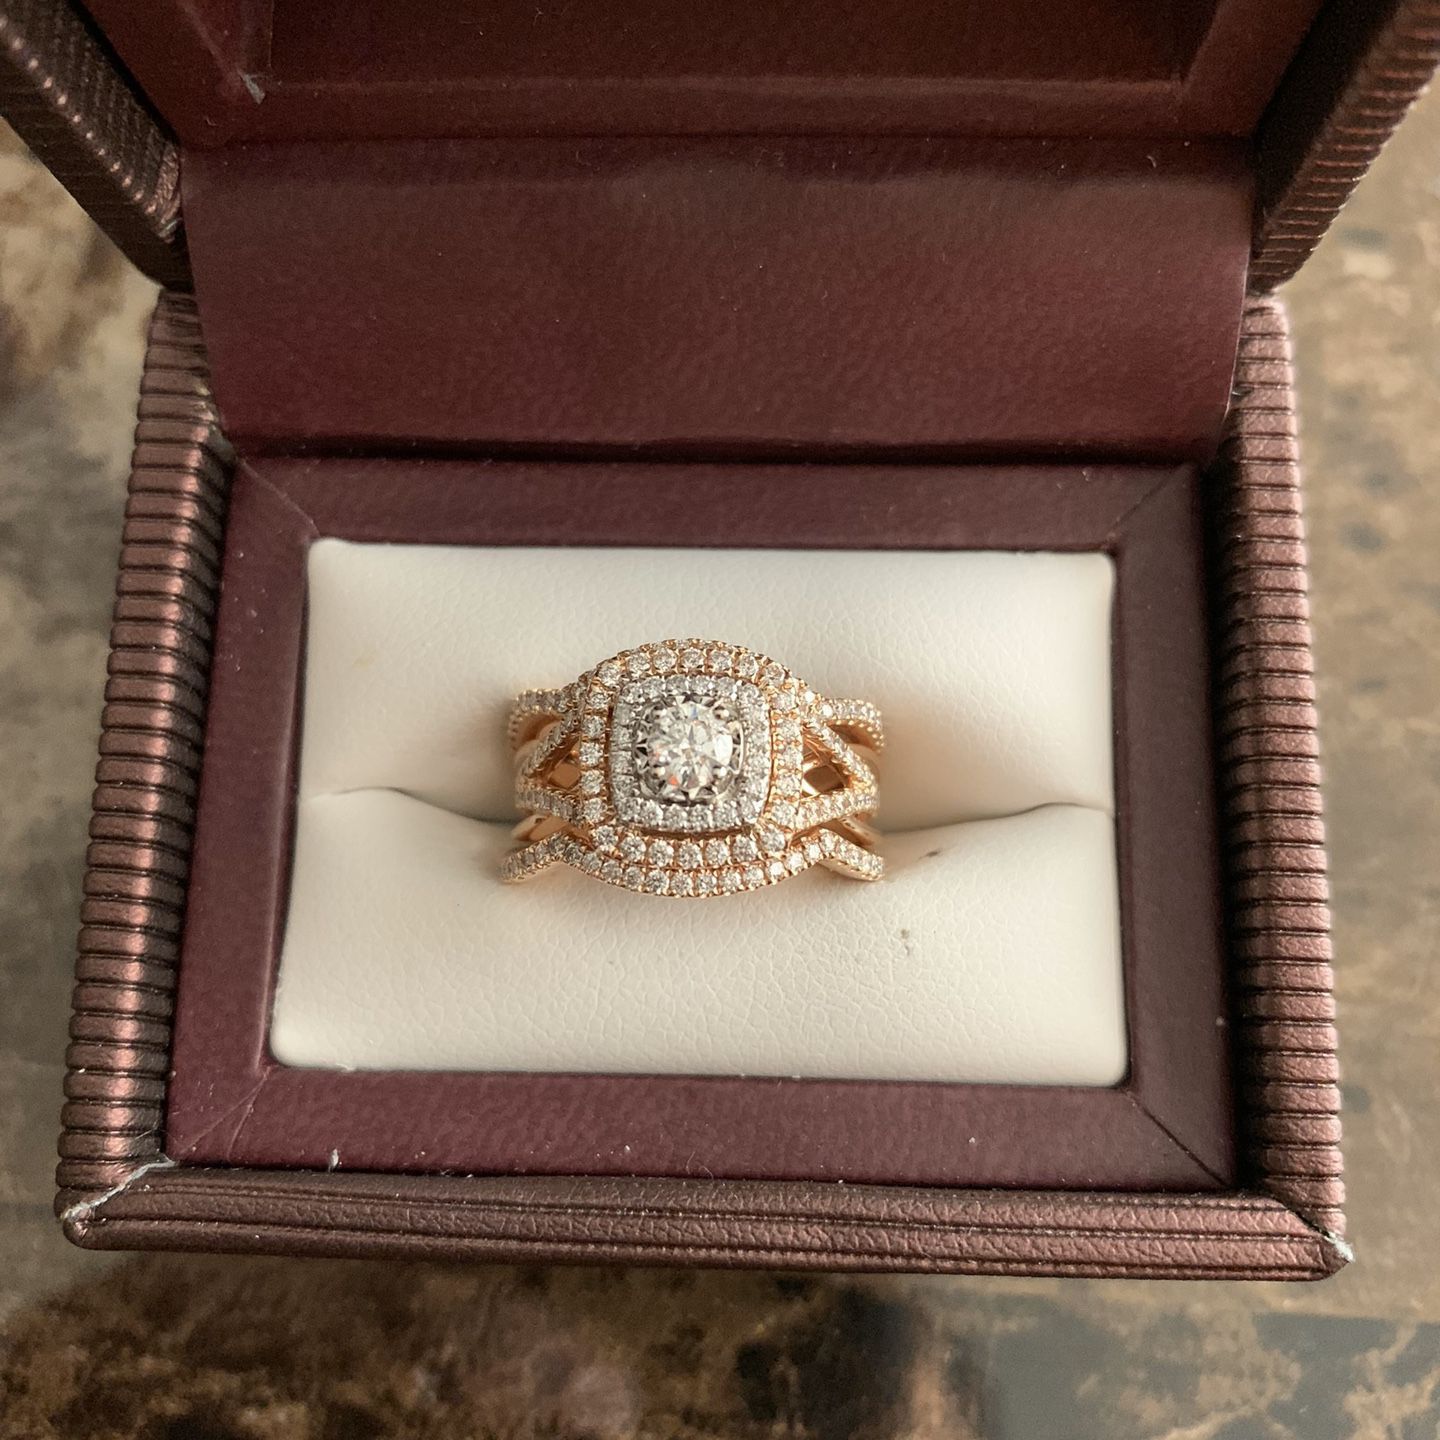 Engagement ring $2000 Or Best Offer